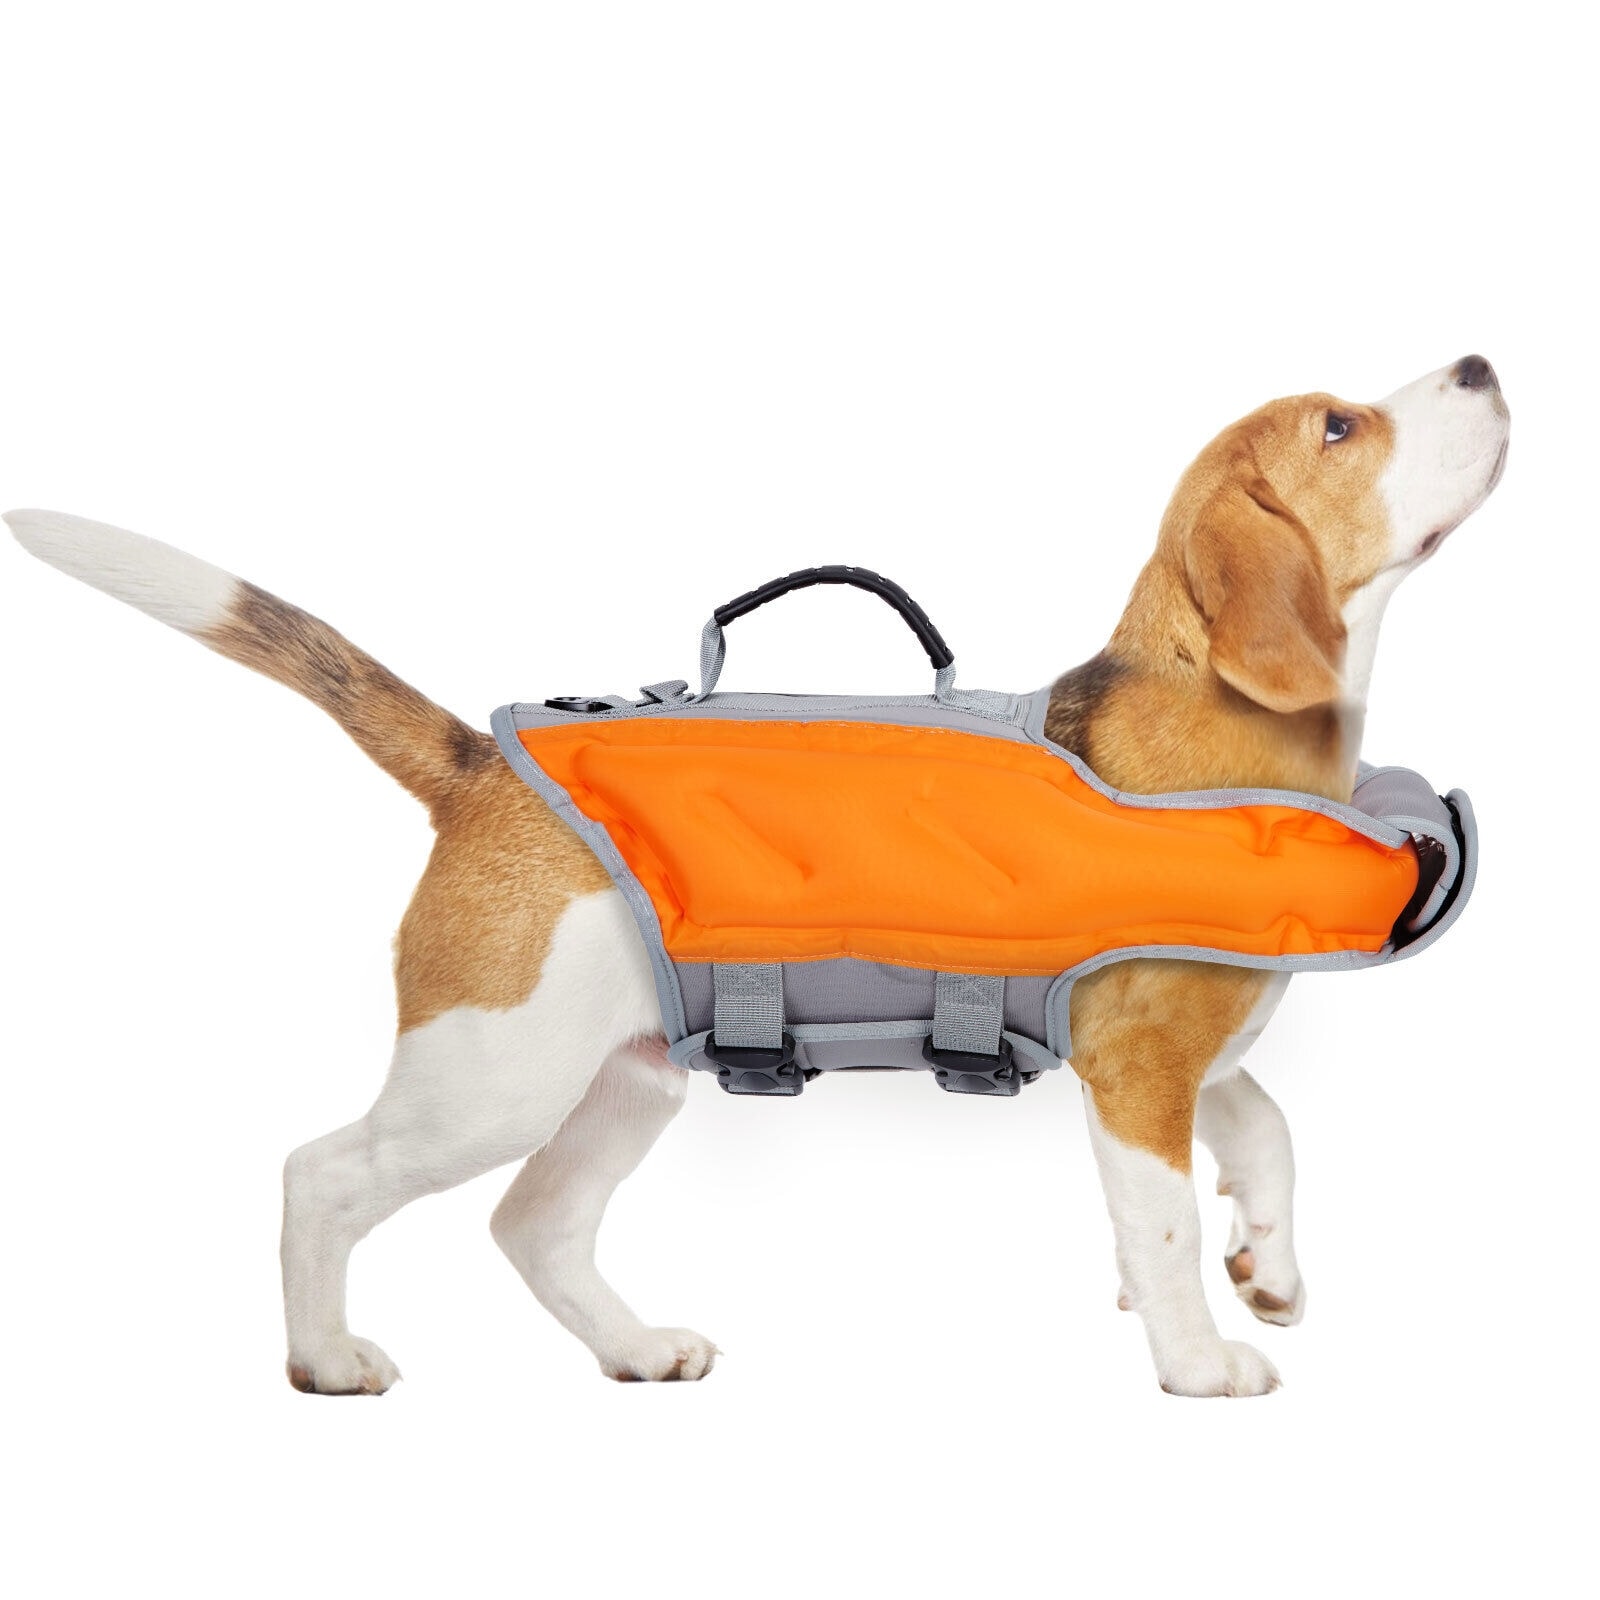 https://ak1.ostkcdn.com/images/products/is/images/direct/1a61a3df52cf9d41e7228ee7512a2e8753439121/Dog-Swim-Safety-Vest-Life-Jacket-Preservers-Reflective-Inflatable-Rescue.jpg